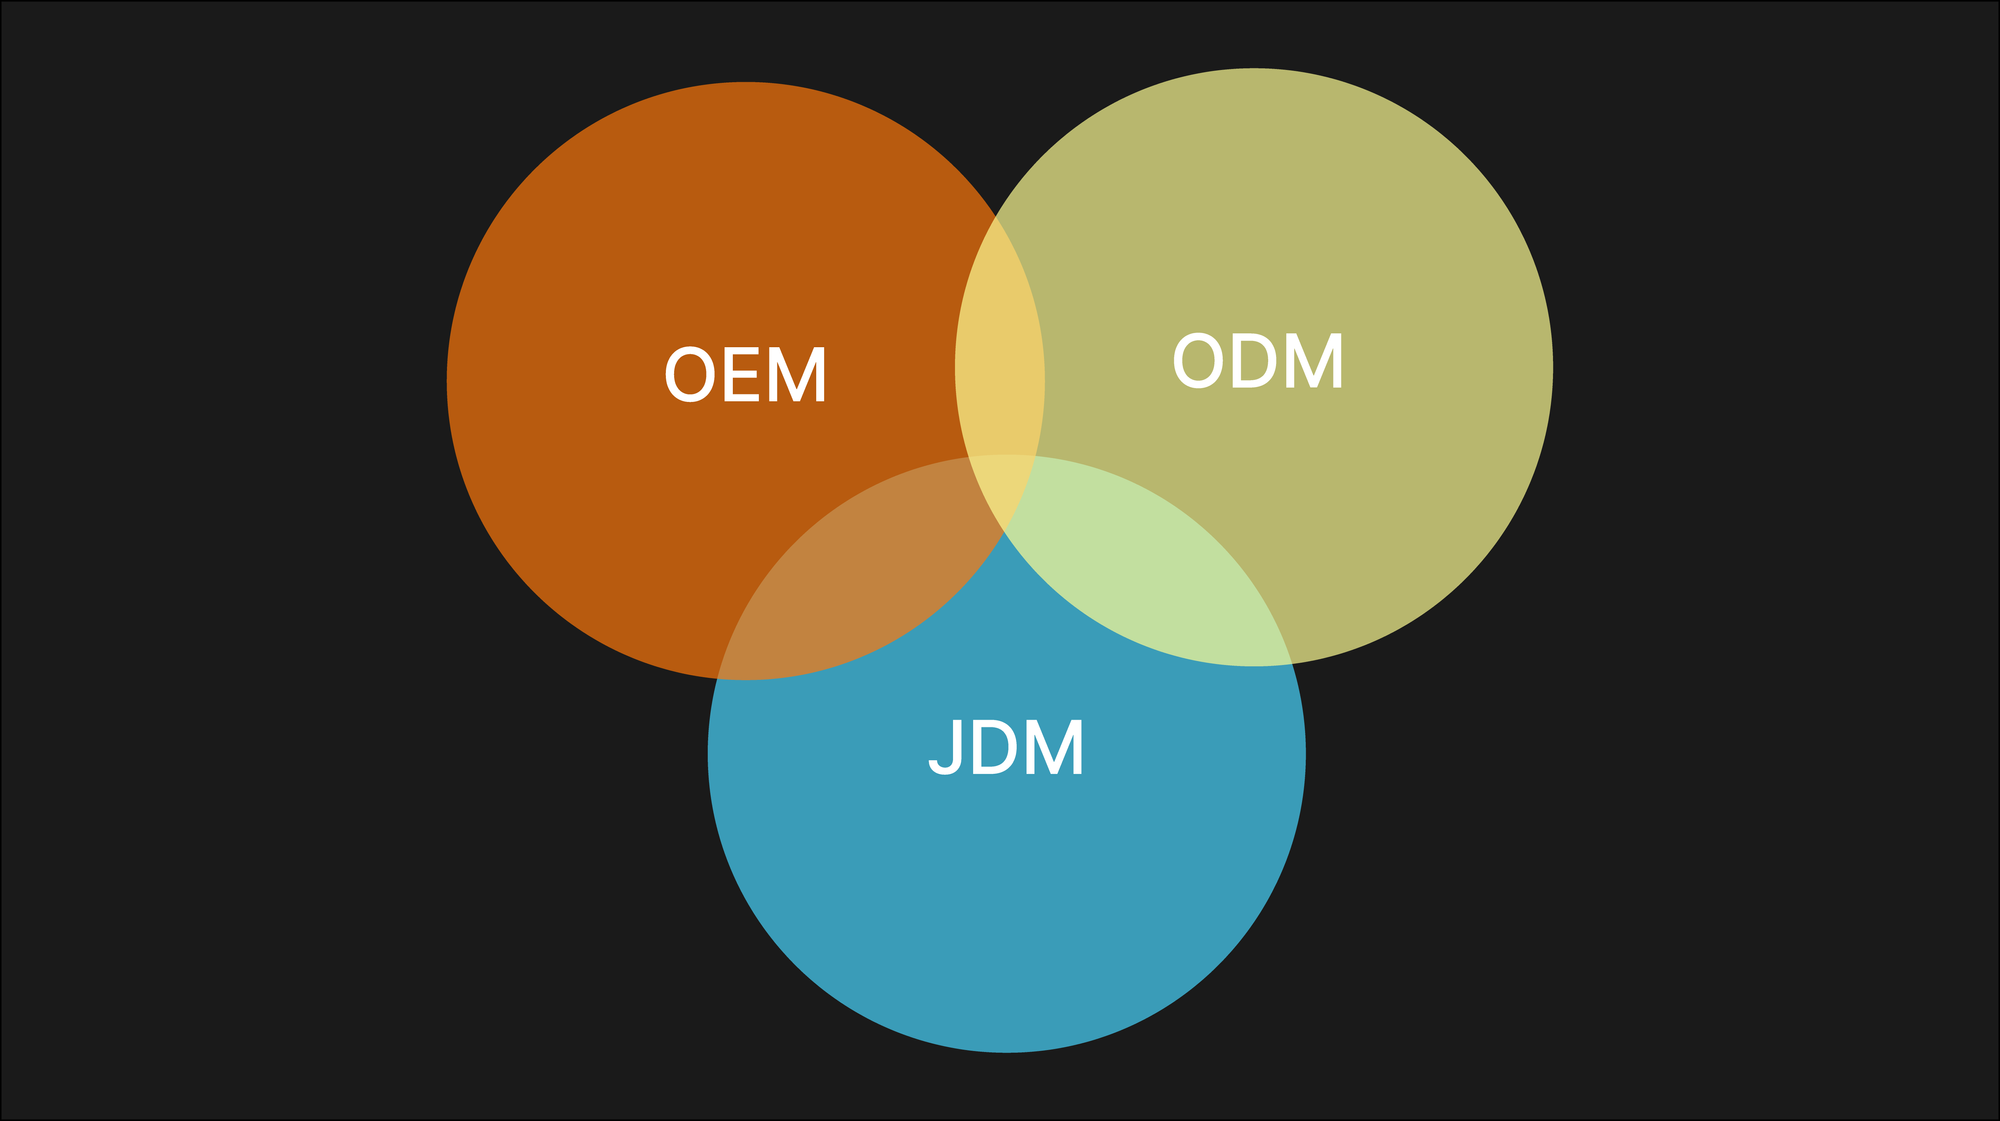 What is an OEM, ODM, and JDM?